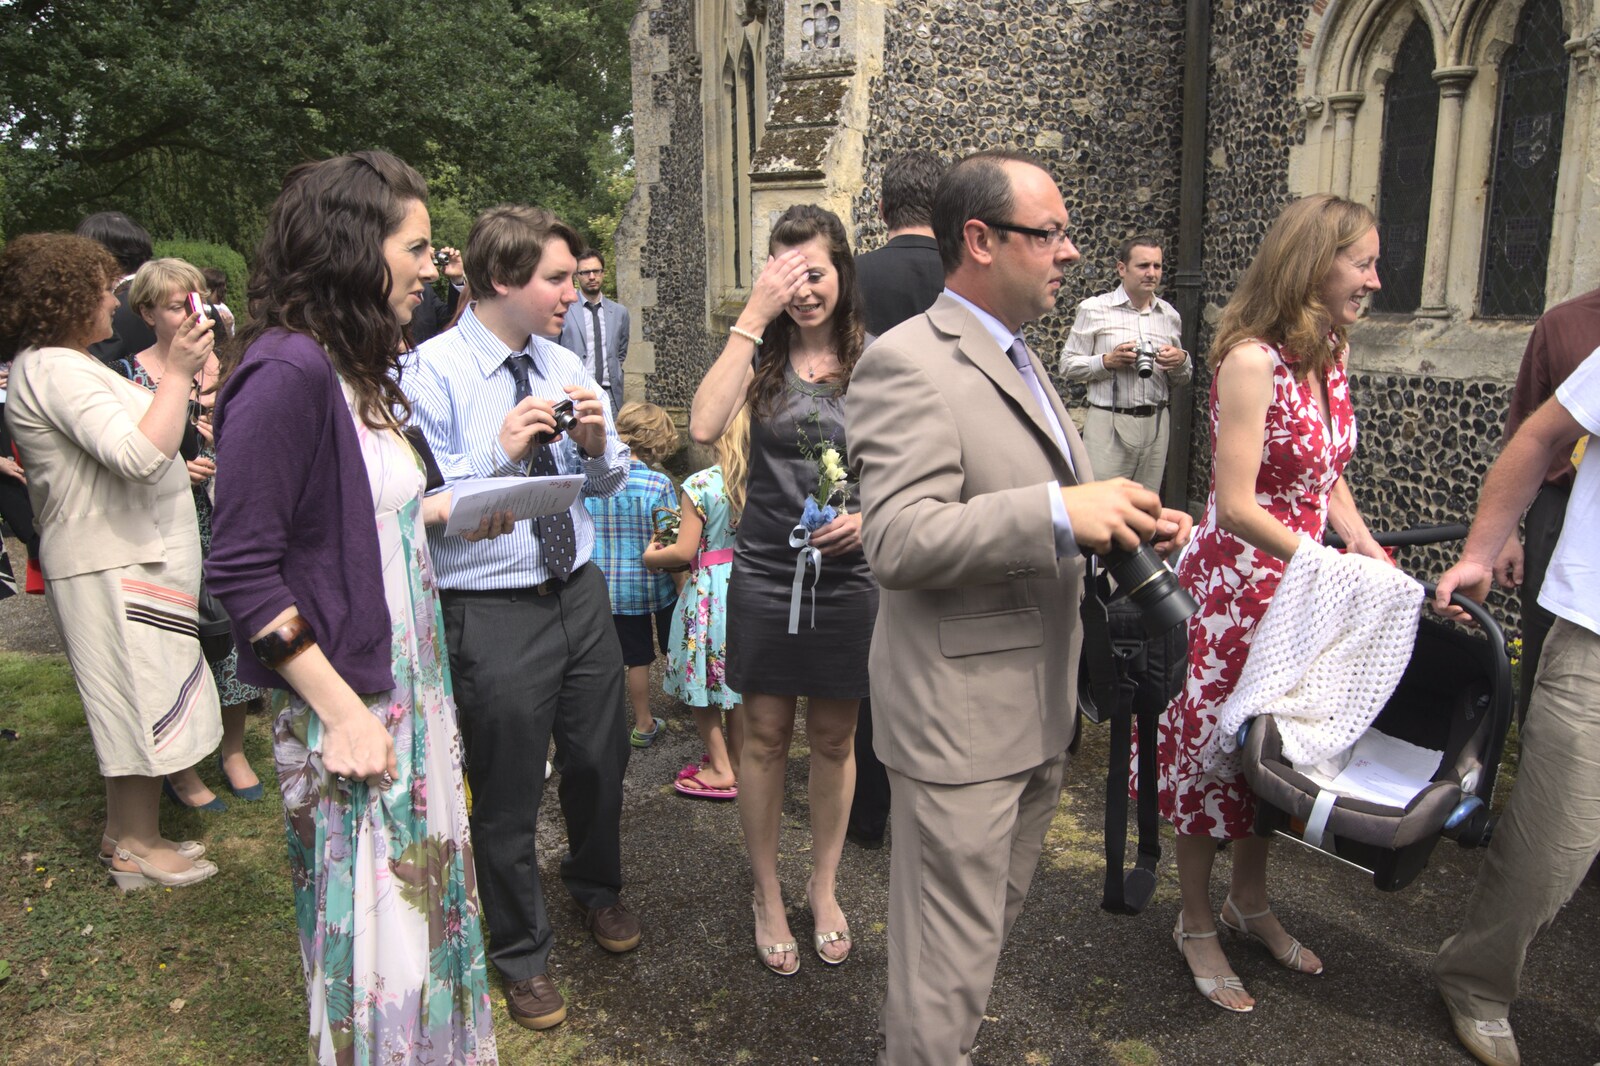 Milling around outside the church from Nosher and Isobel's Wedding, Brome, Suffolk - 3rd July 2010